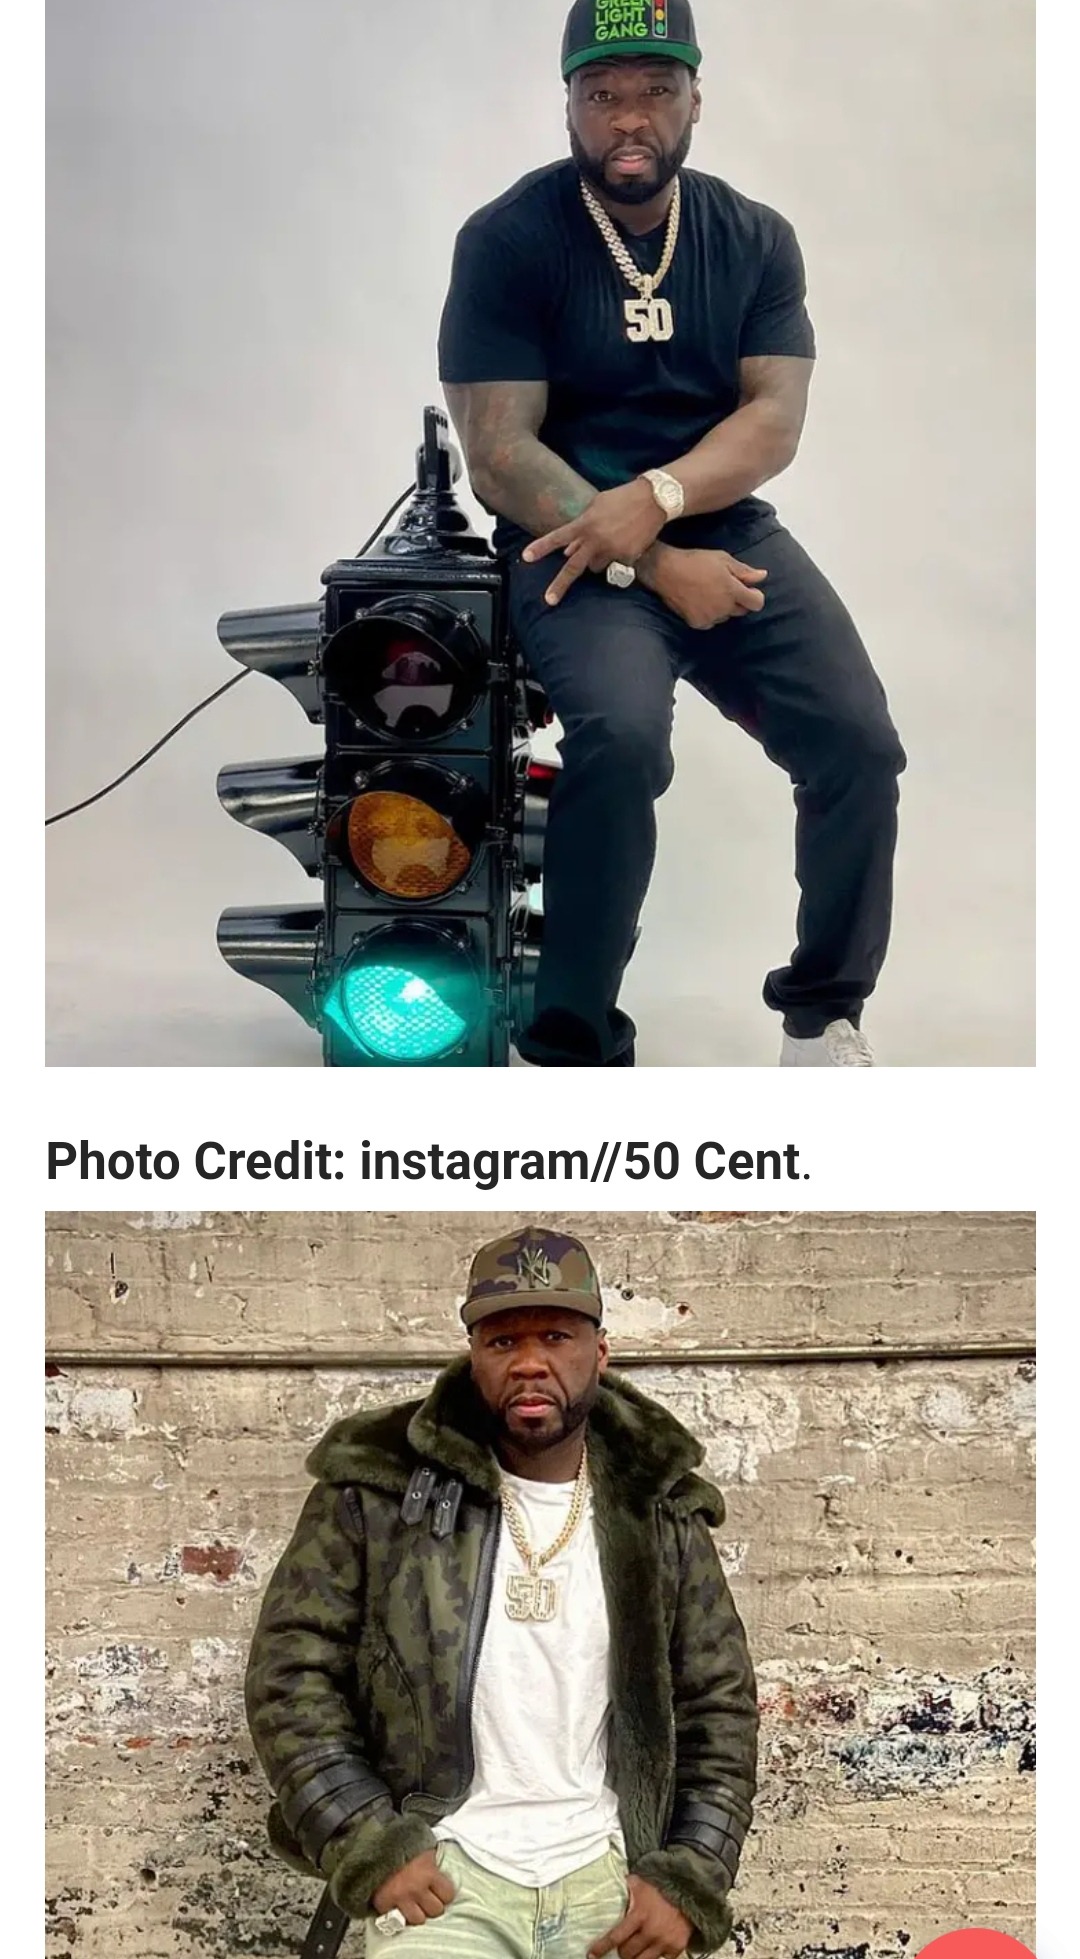 How 50 Cent Lost 54 Pounds Weight Just To Play A Role Of A Cancer Patient In A 2011 Movie 3